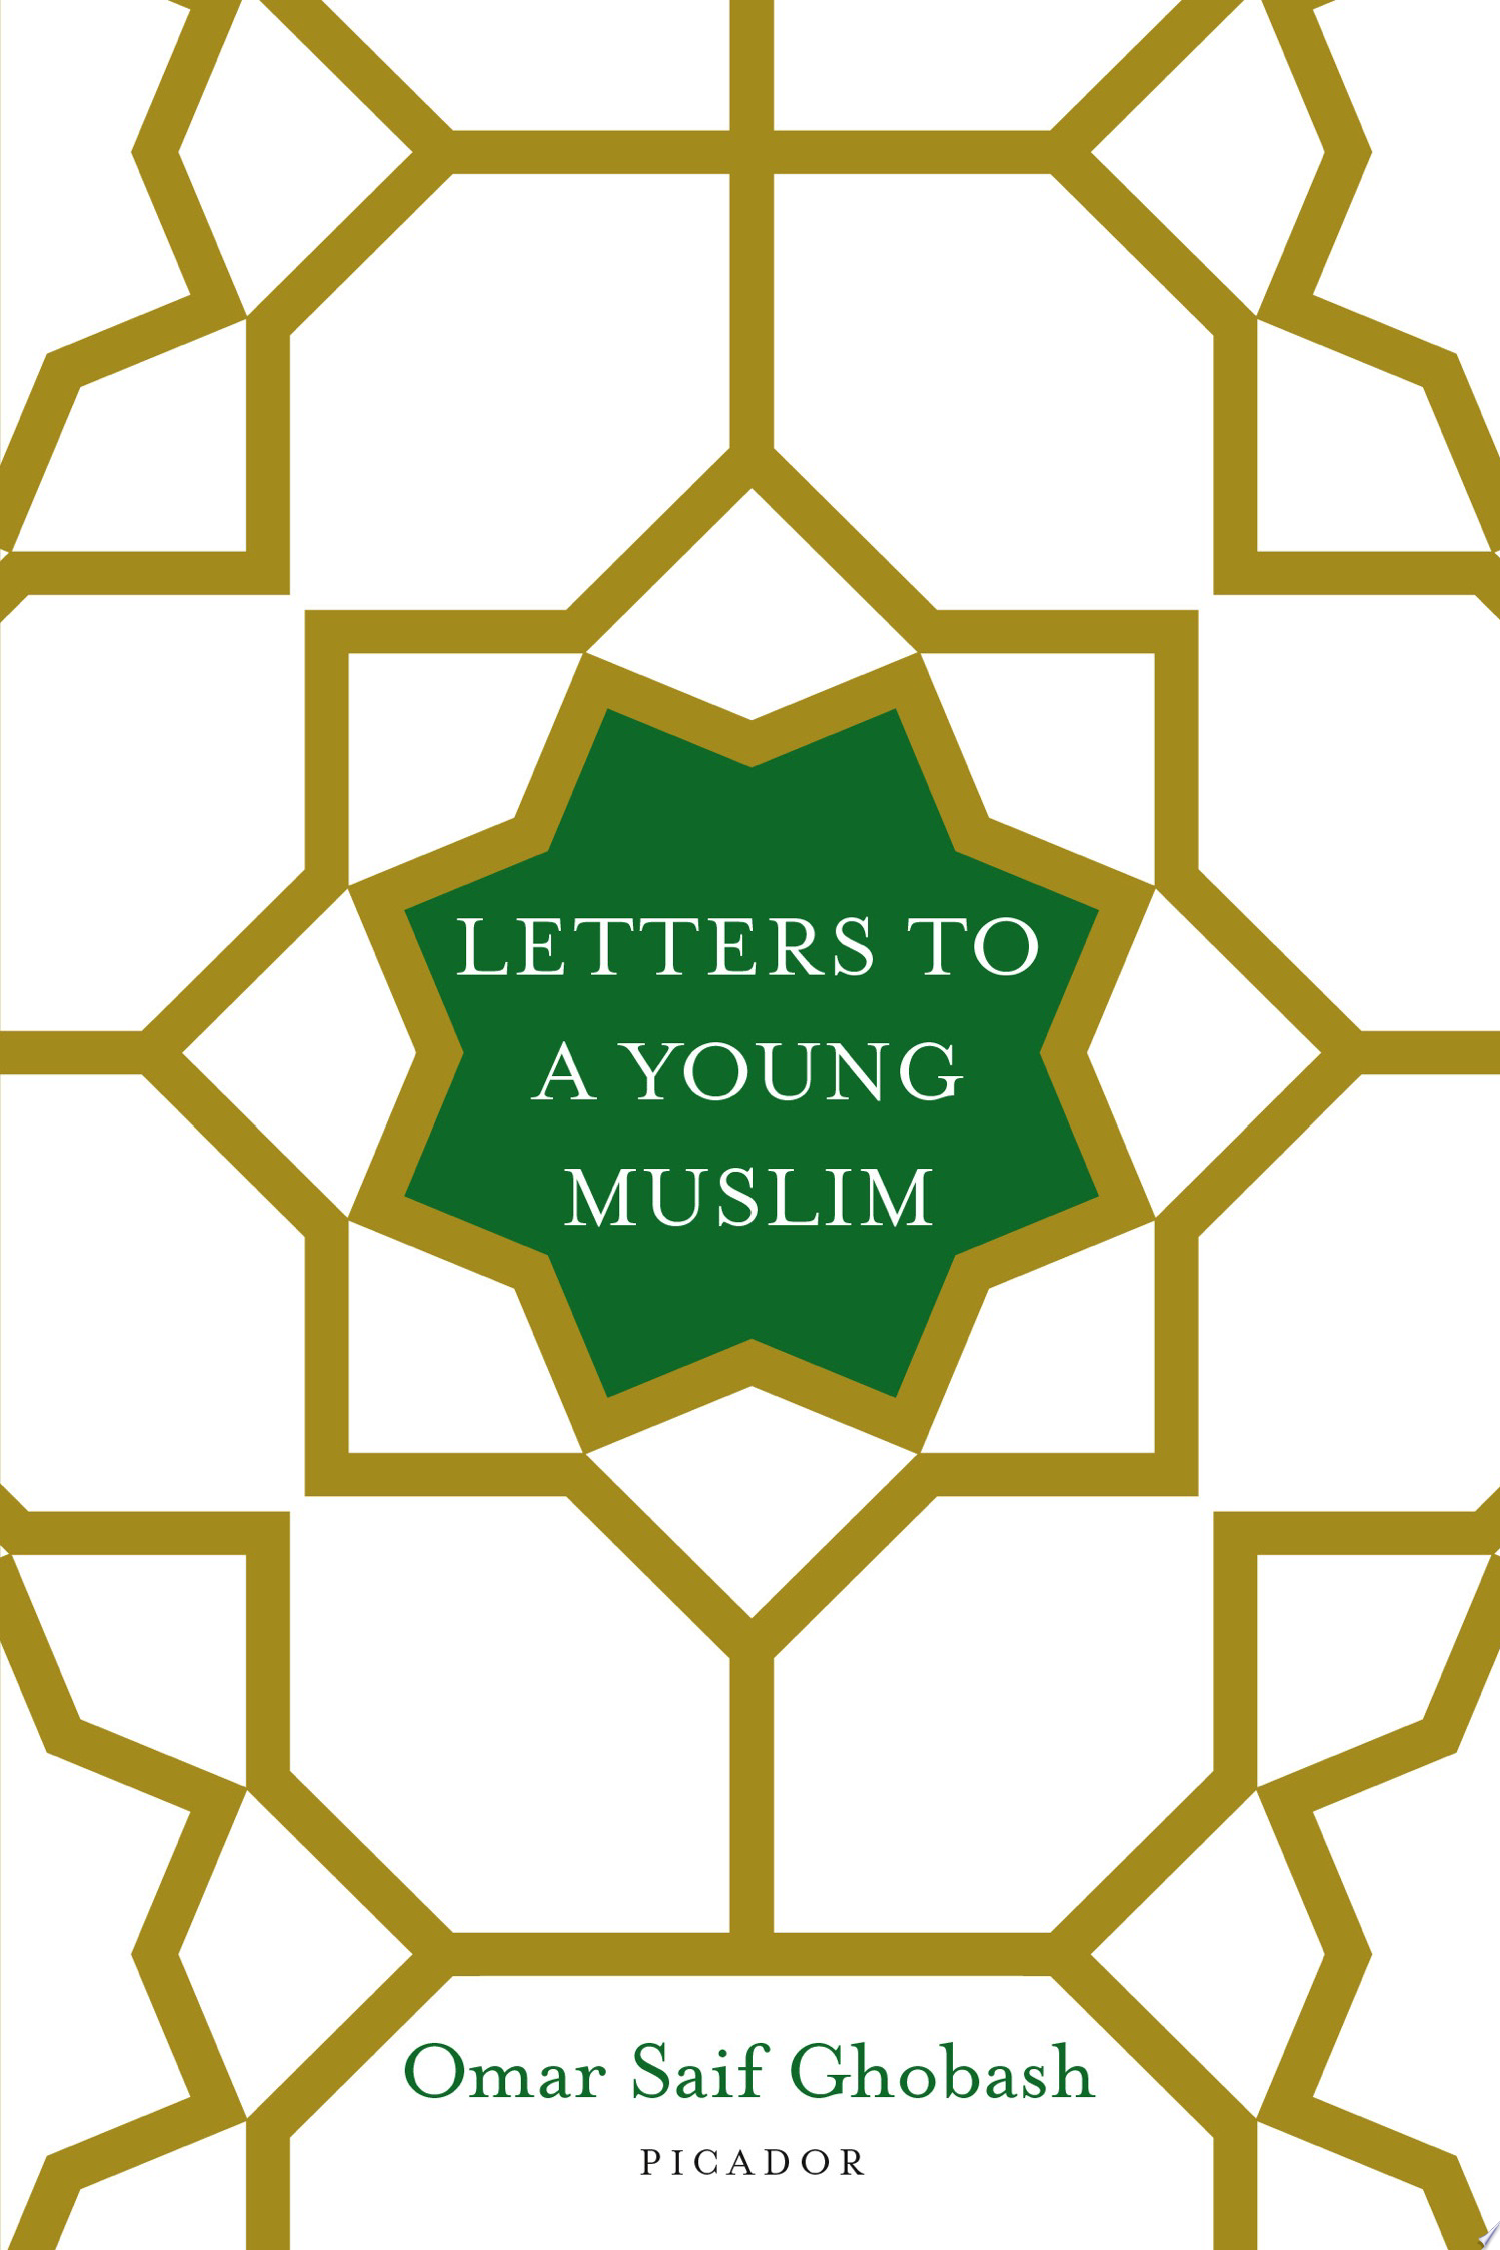 Image for "Letters to a Young Muslim"